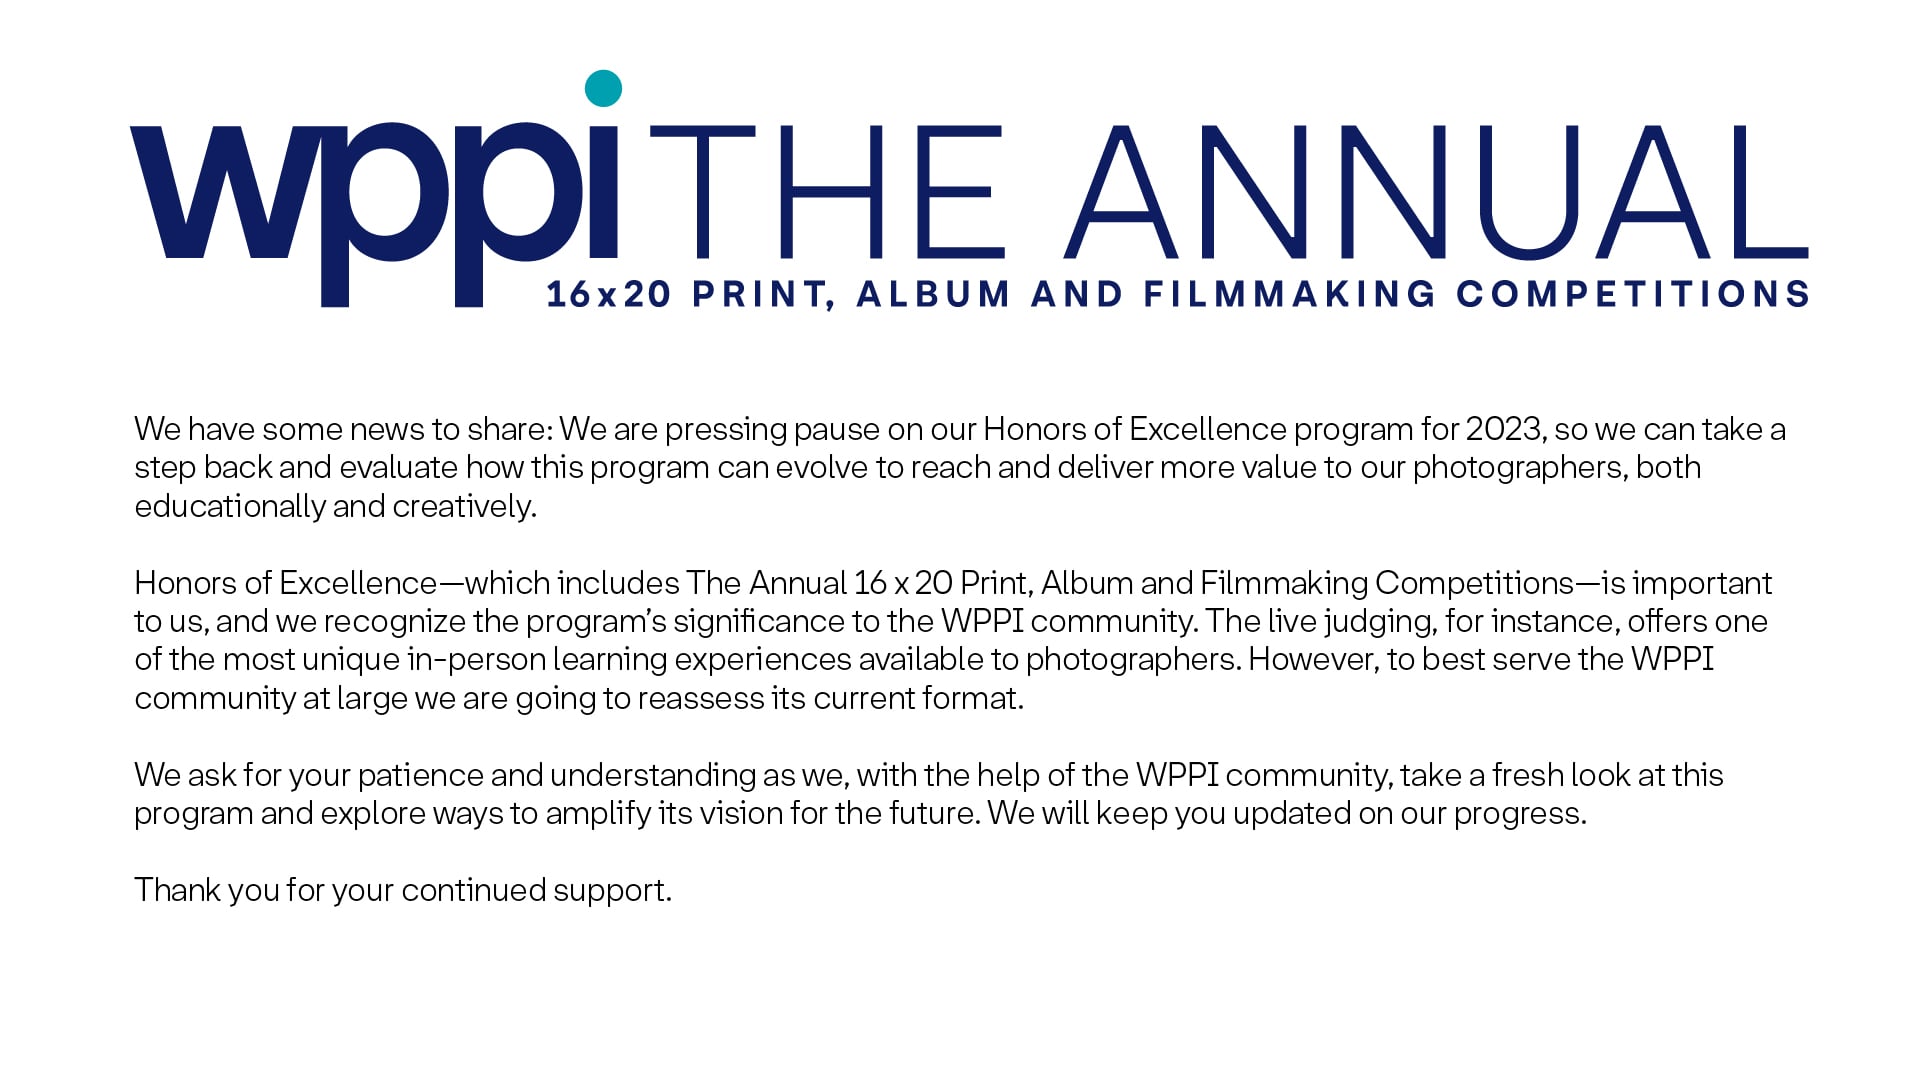 WPPI The Annual 2022 pic